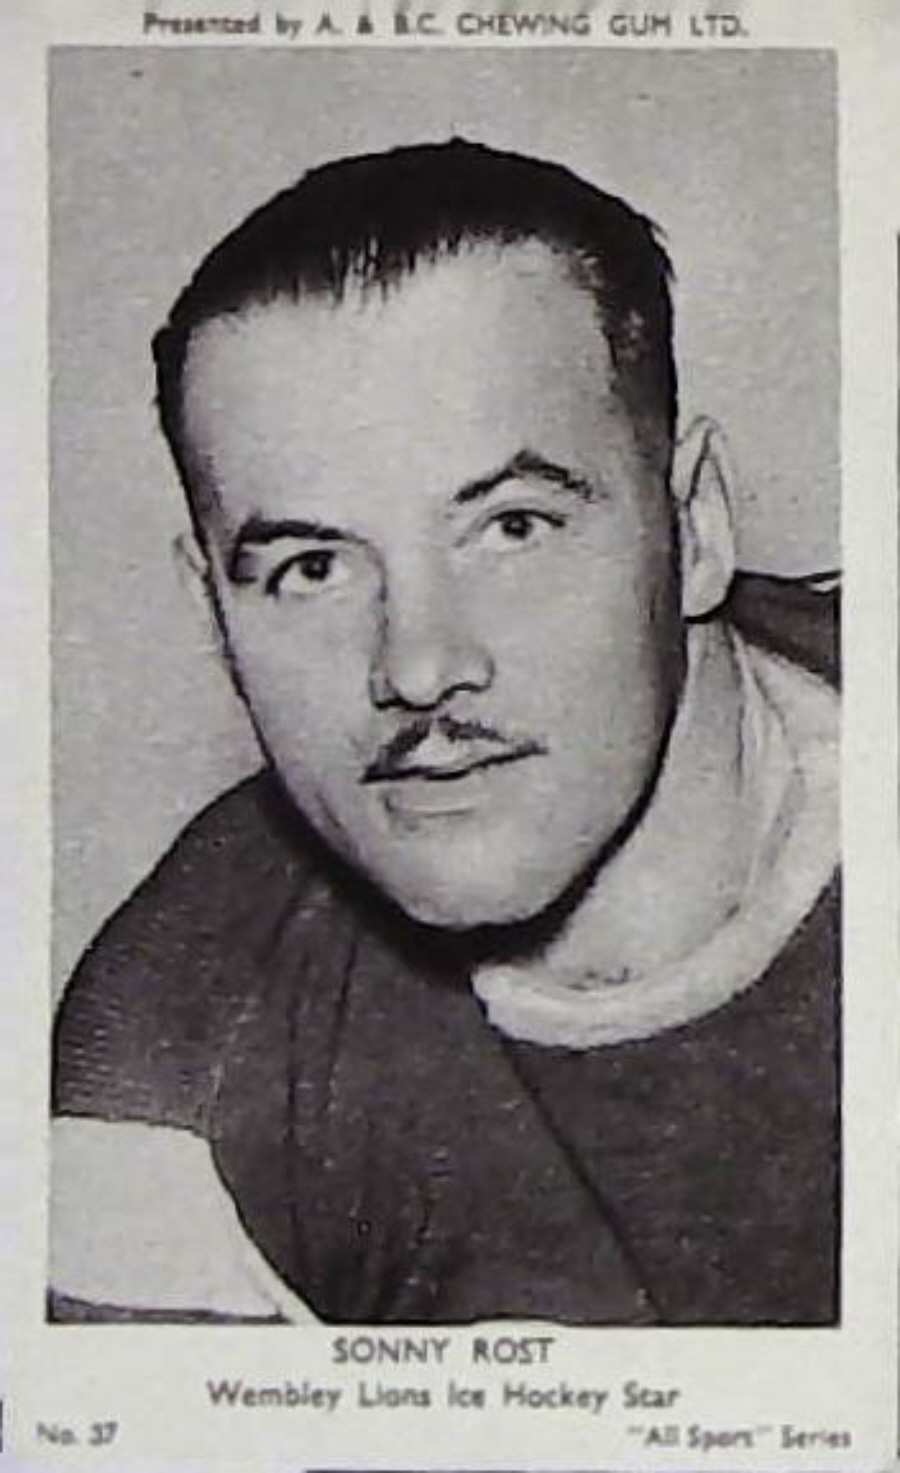 A & B C 1954 All Sports Ice Hockey Sonny Rost No 37